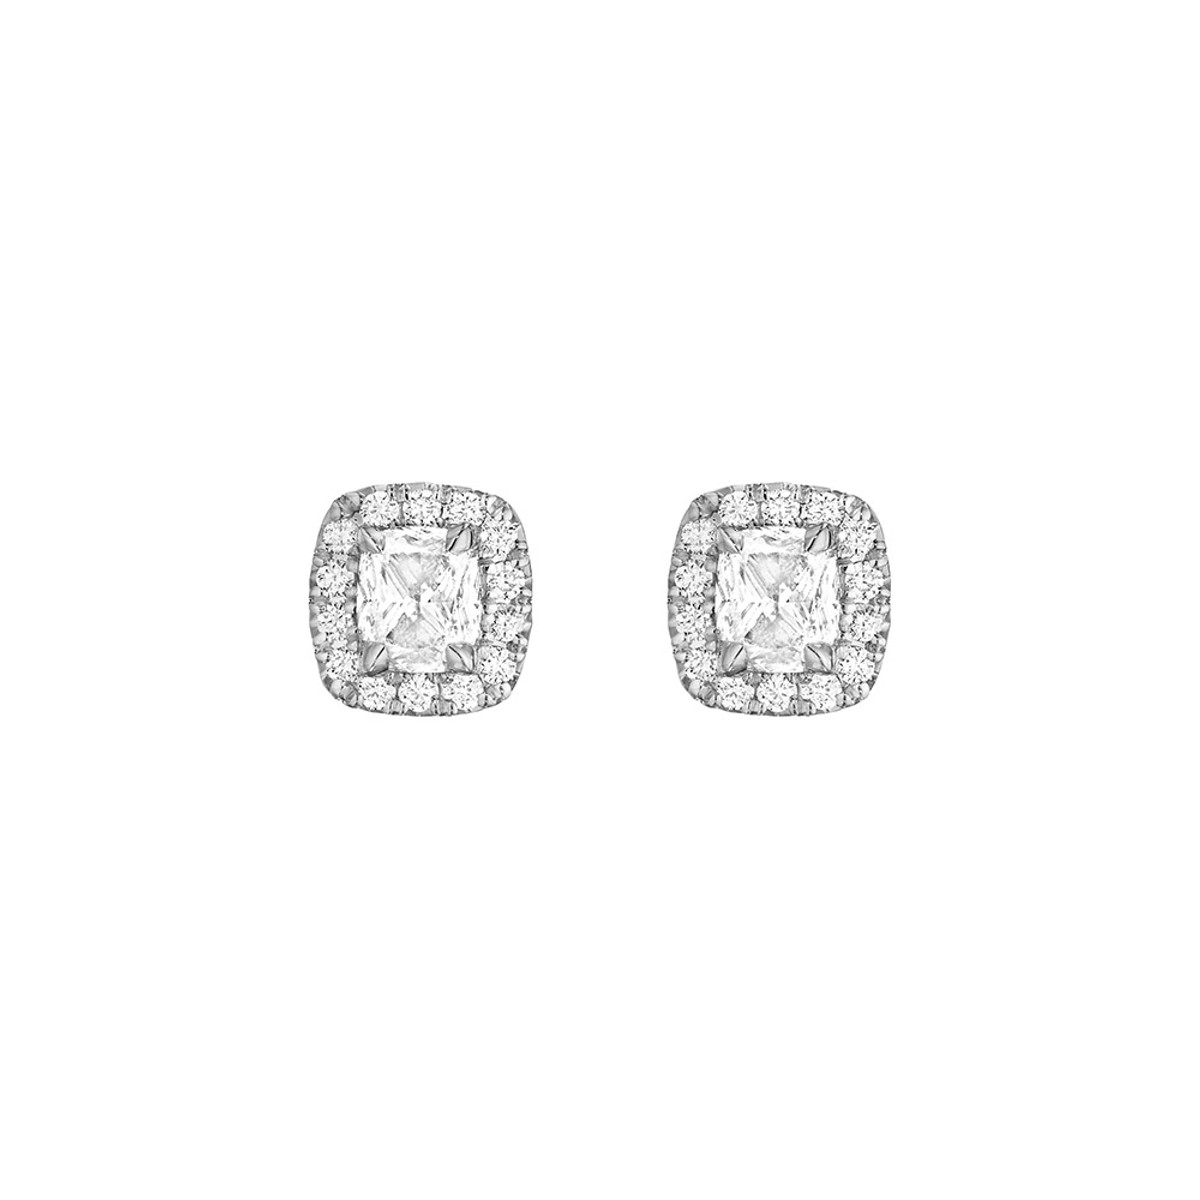 18KW DIAMOND HALO EARRINGS 2CU=1.41CTTW D SI1 40RB=0.23CTTW-49078 Product Image